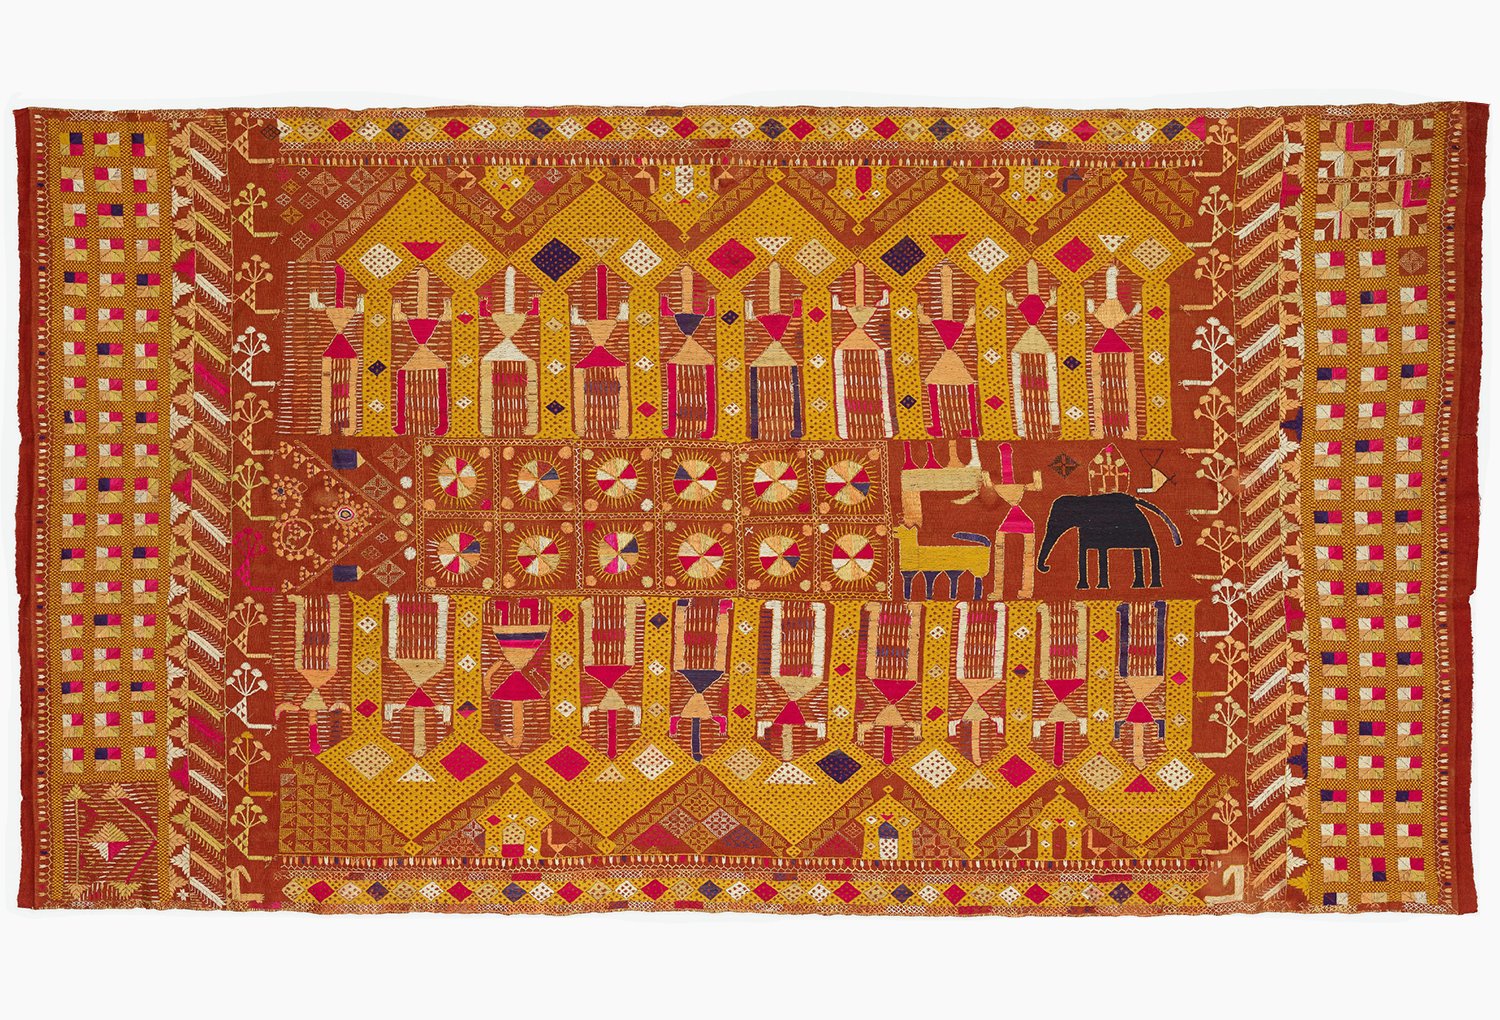 Embroidered textile showing two rows of figures under archways. Human, animal and floral symbols in the centre and the border.